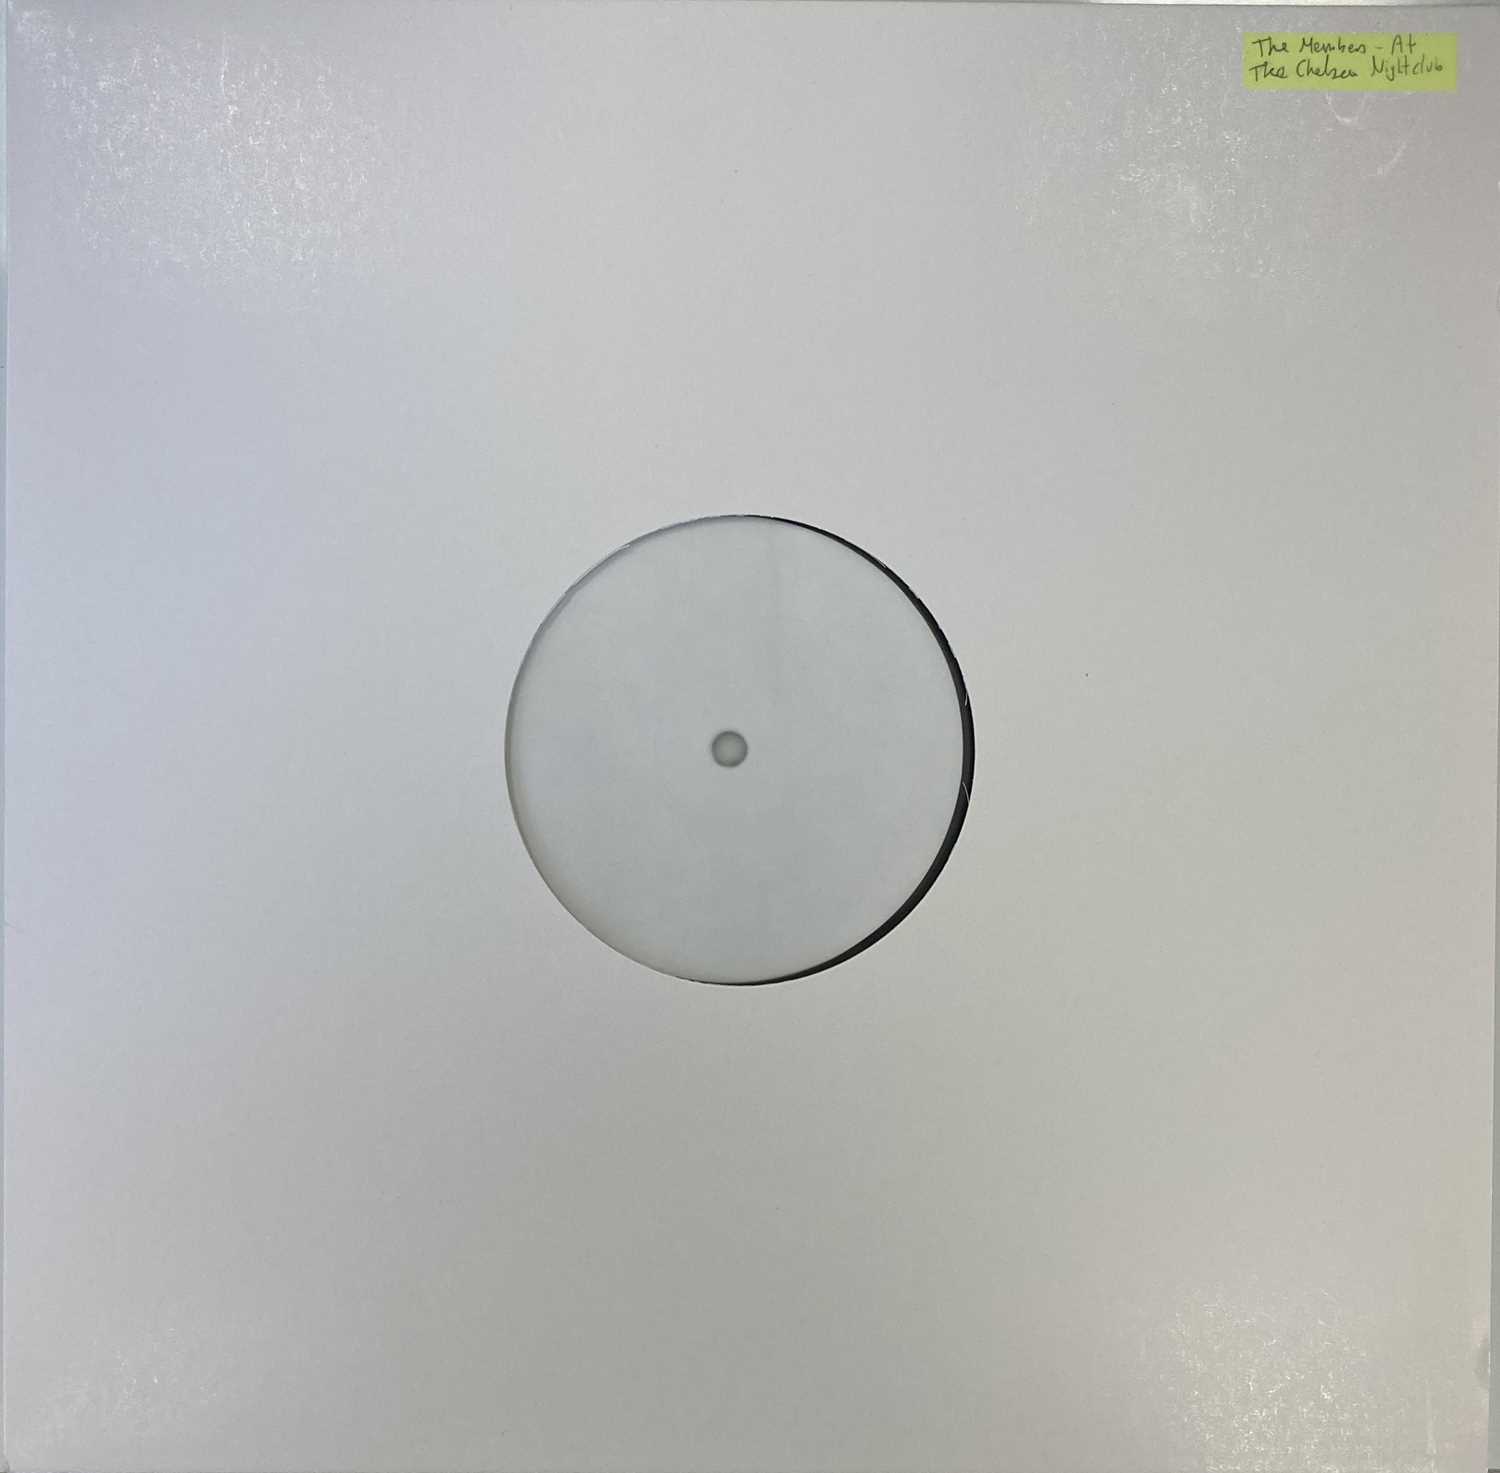 Lot 65 - THE MEMBERS - AT THE CHELSEA NIGHTCLUB LP (2016 WHITE LABEL TEST PRESSING)